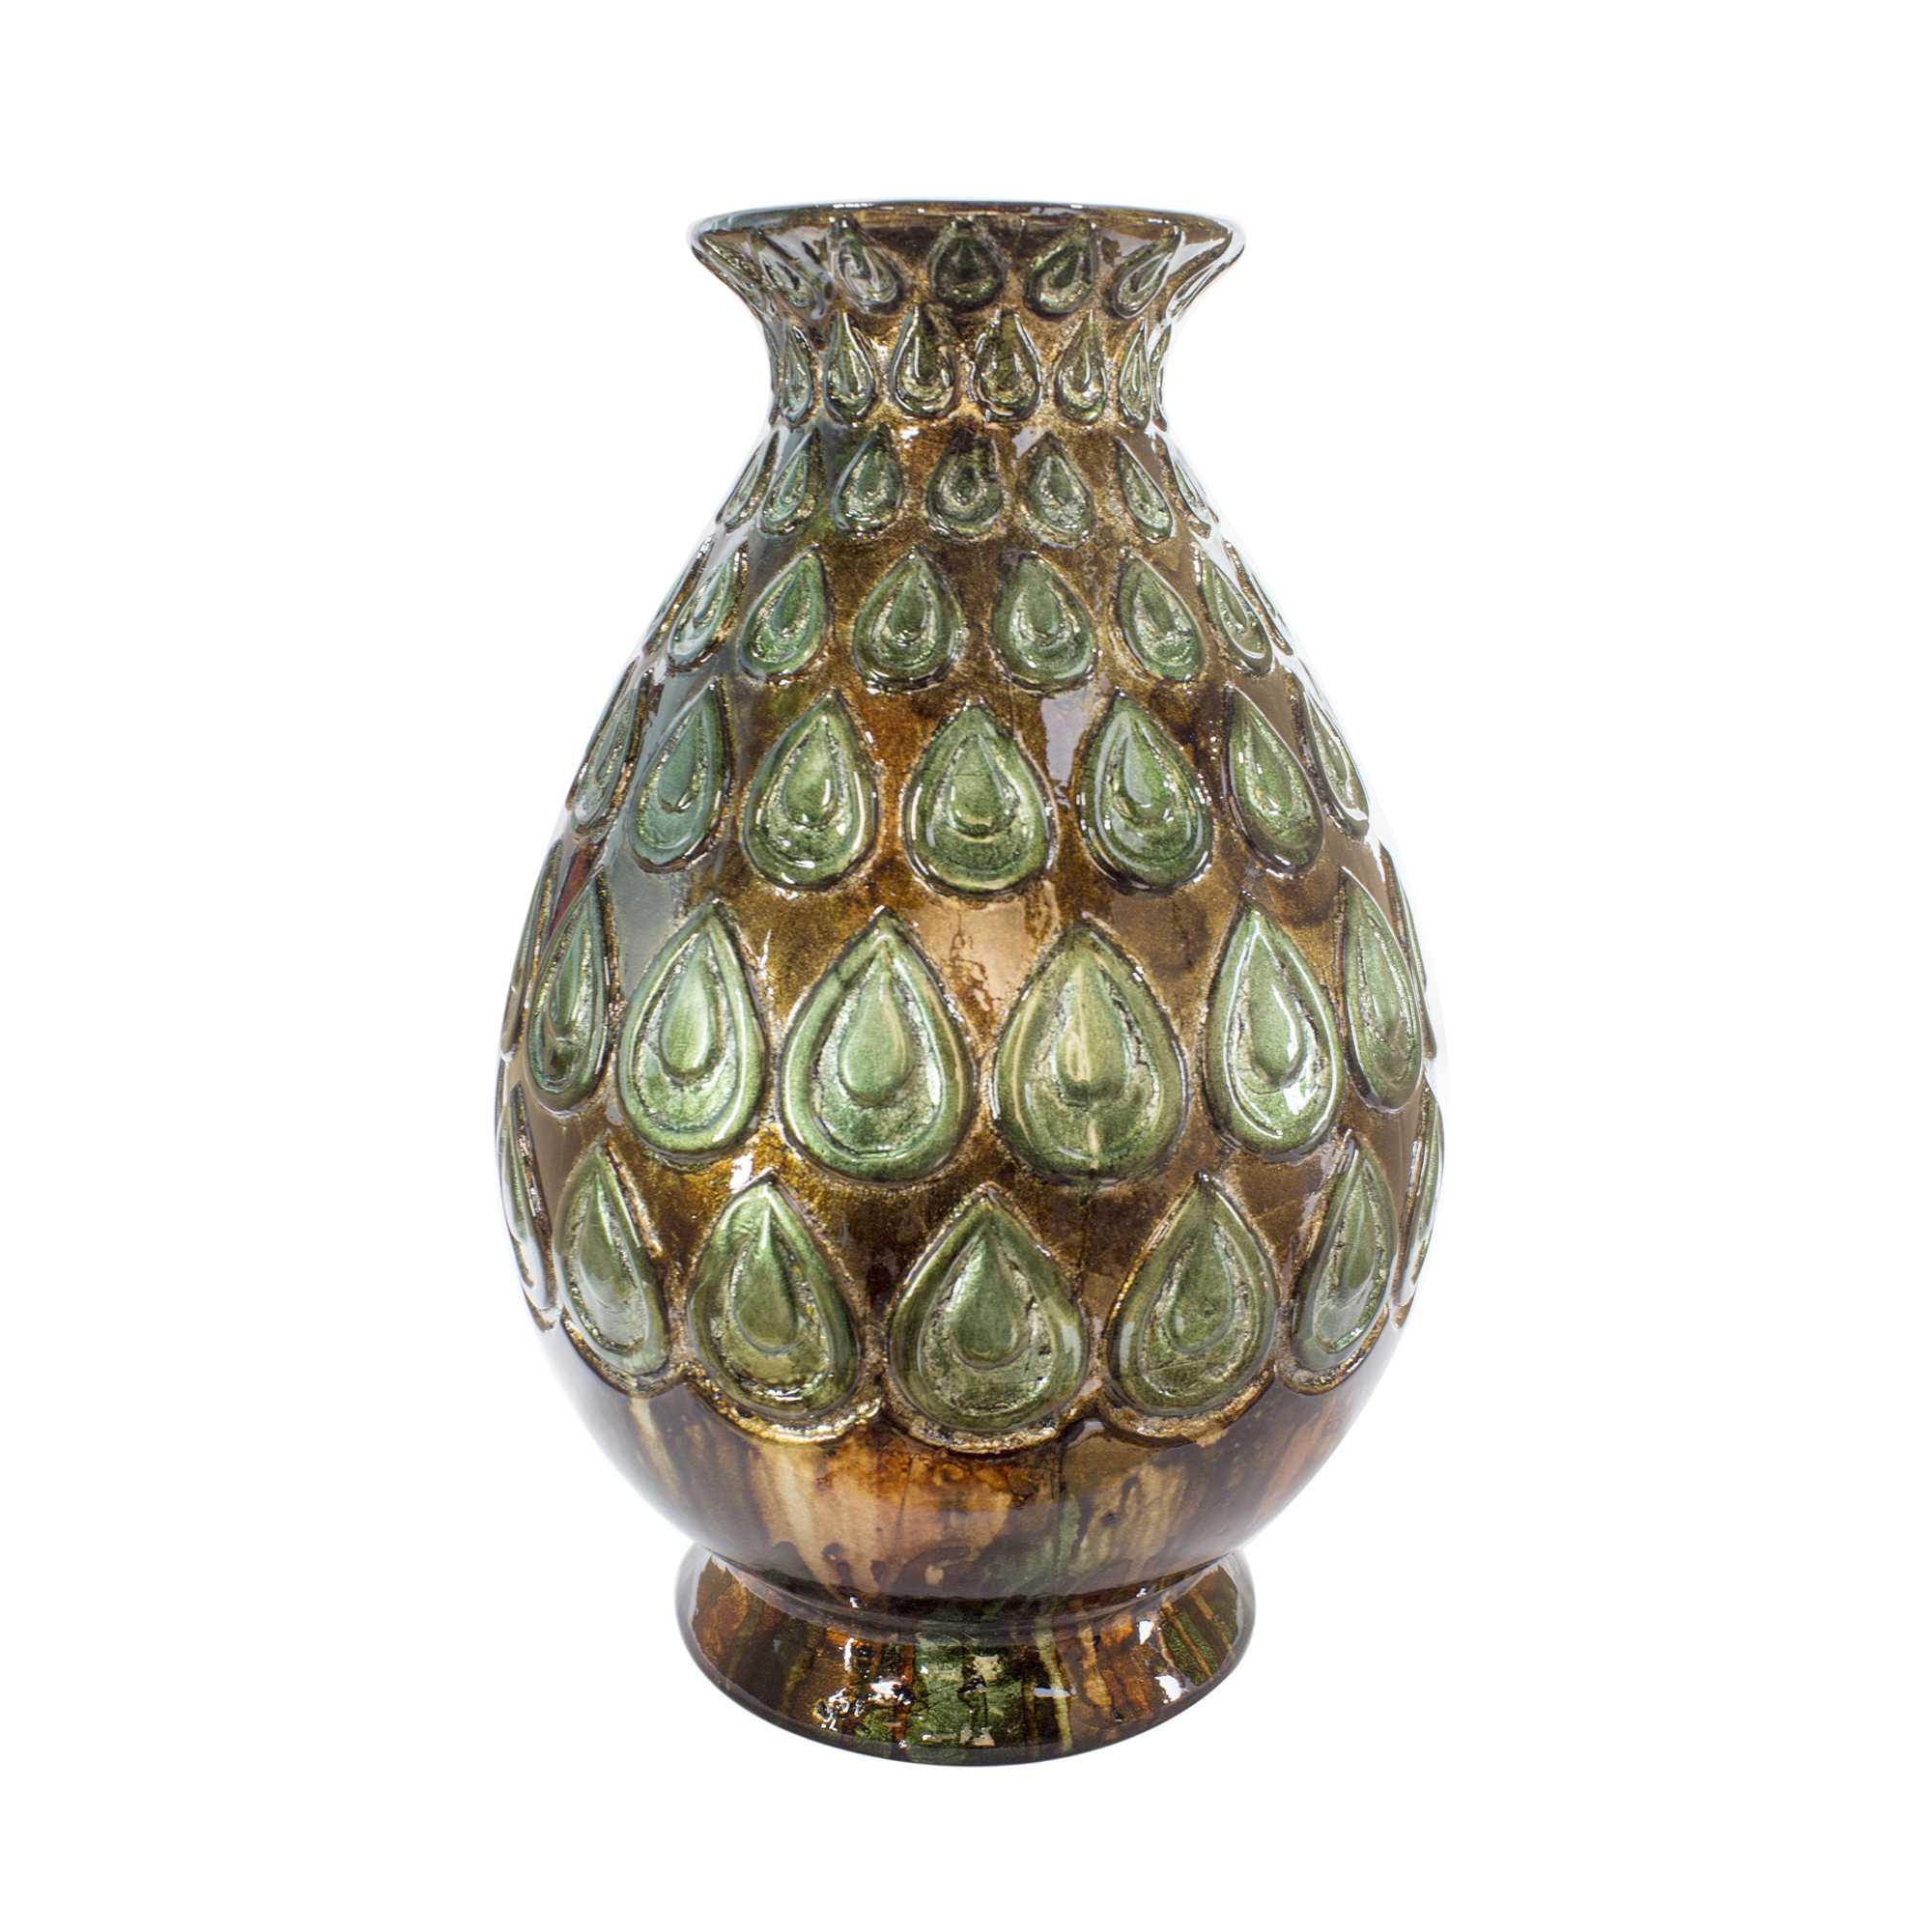 8.75" X 8.75" X 14.25" Turquoise Copper Bronze Ceramic Foiled and Lacquered Pattern Stamped Vase